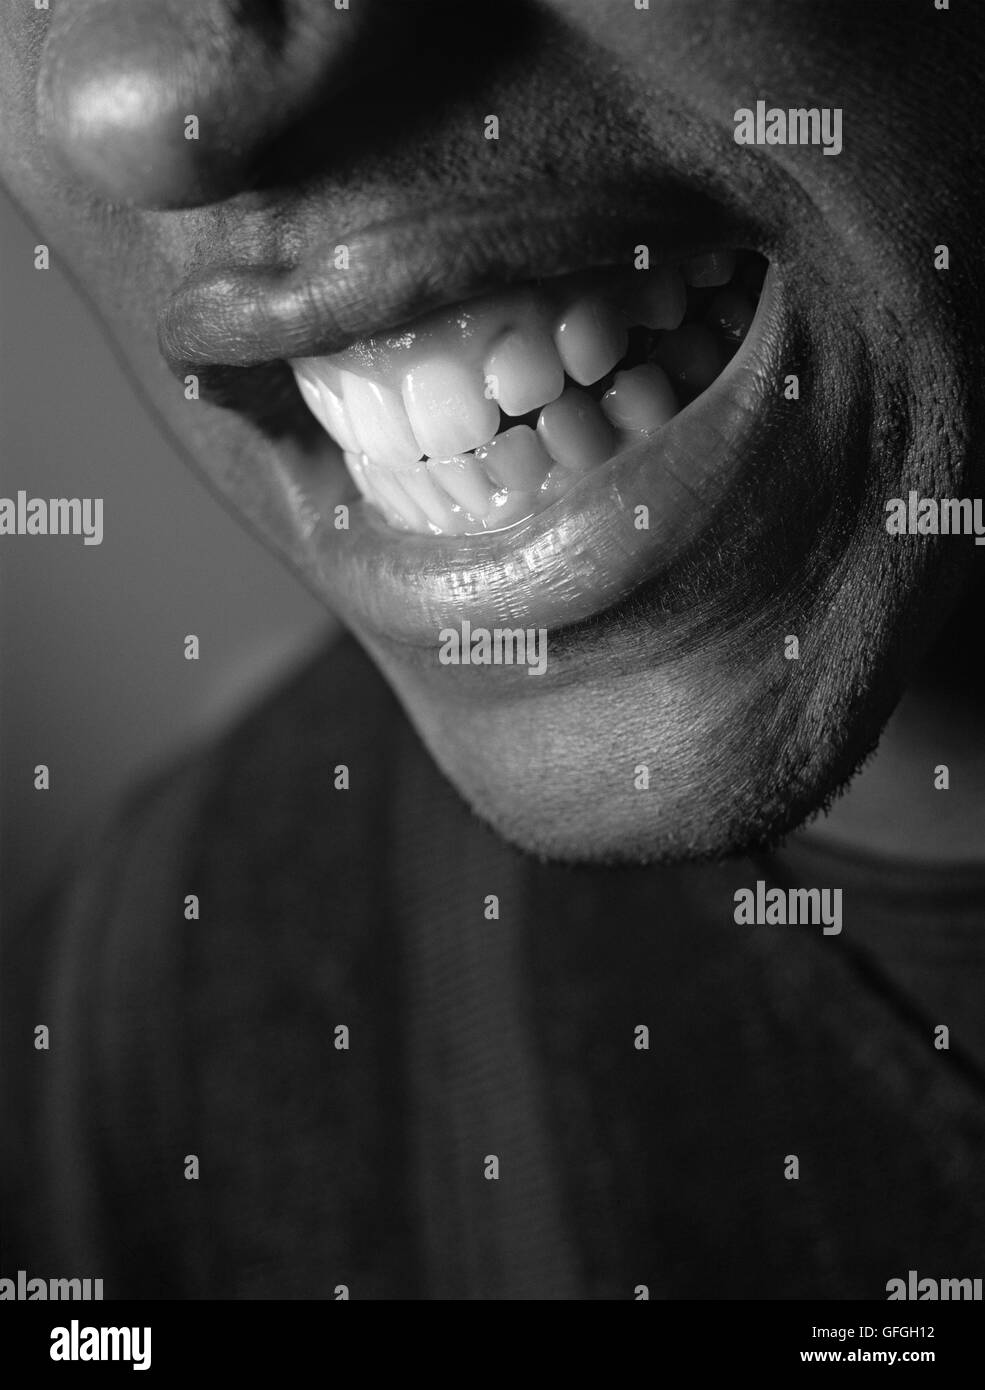 Closeup of a man cringing his teeth in disgust Stock Photo